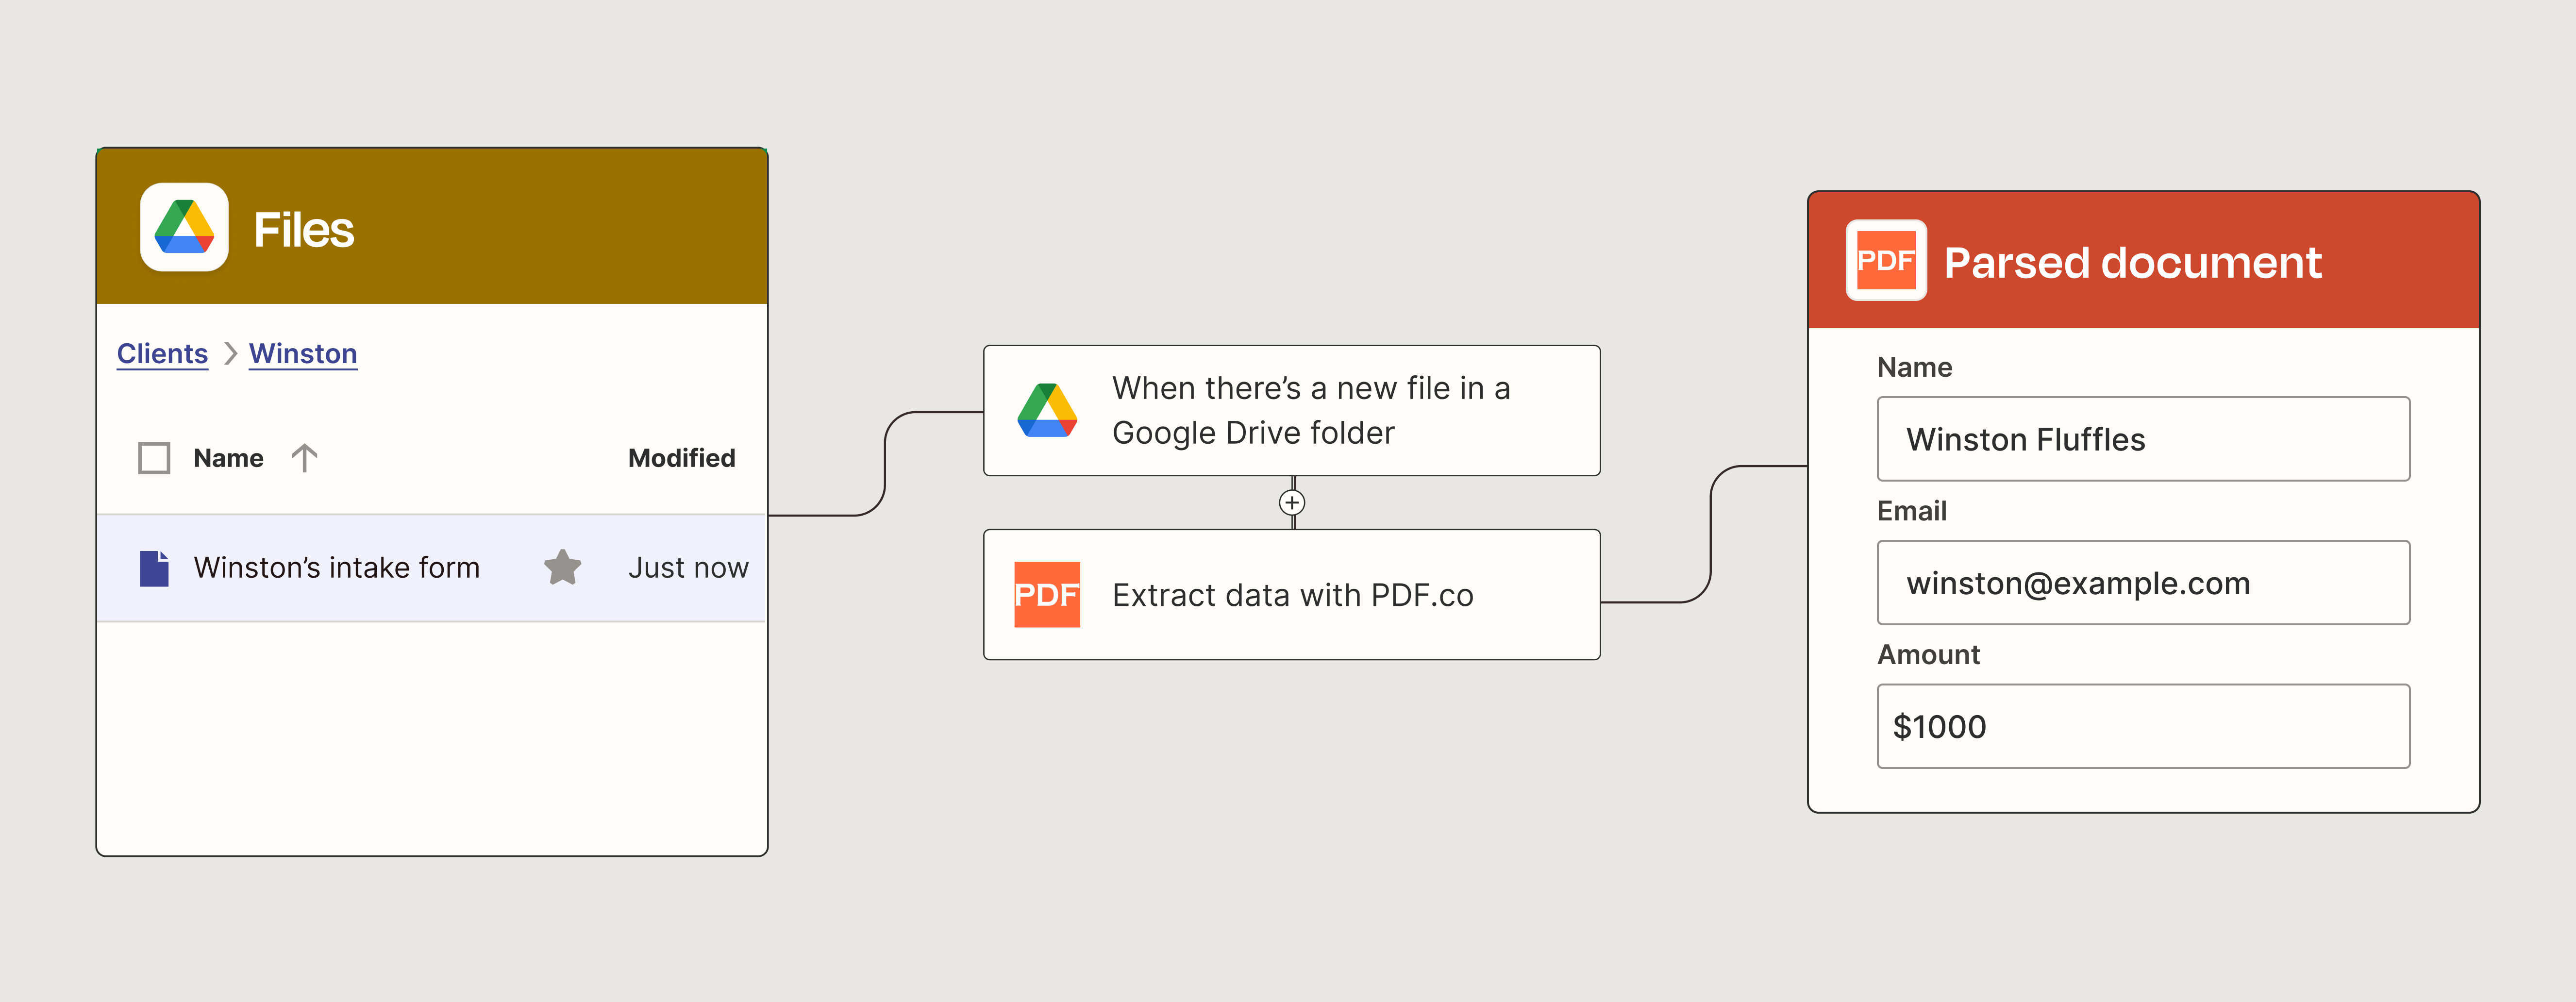 A Zapier automated workflow that uses PDF.co to parse data from files whenever new ones are uploaded to a Google Drive file.